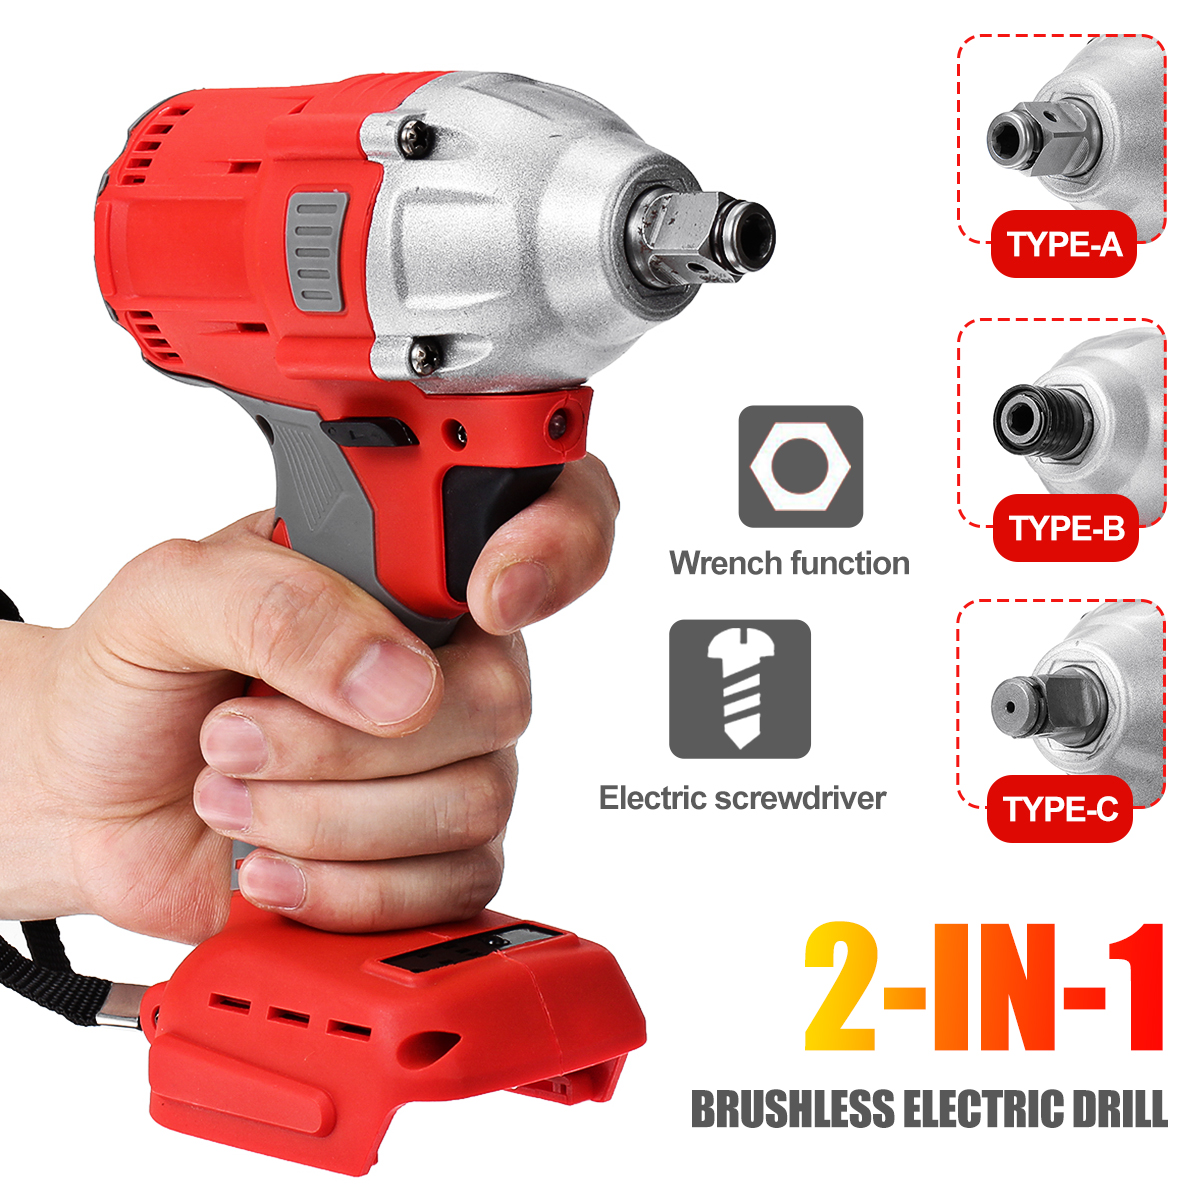 800NM-Brushless-Torque-Wrench-Electric-Screwdriver-Wrench-Cordless-Rechargable-Screw-Driver-Wrench-P-1843516-2